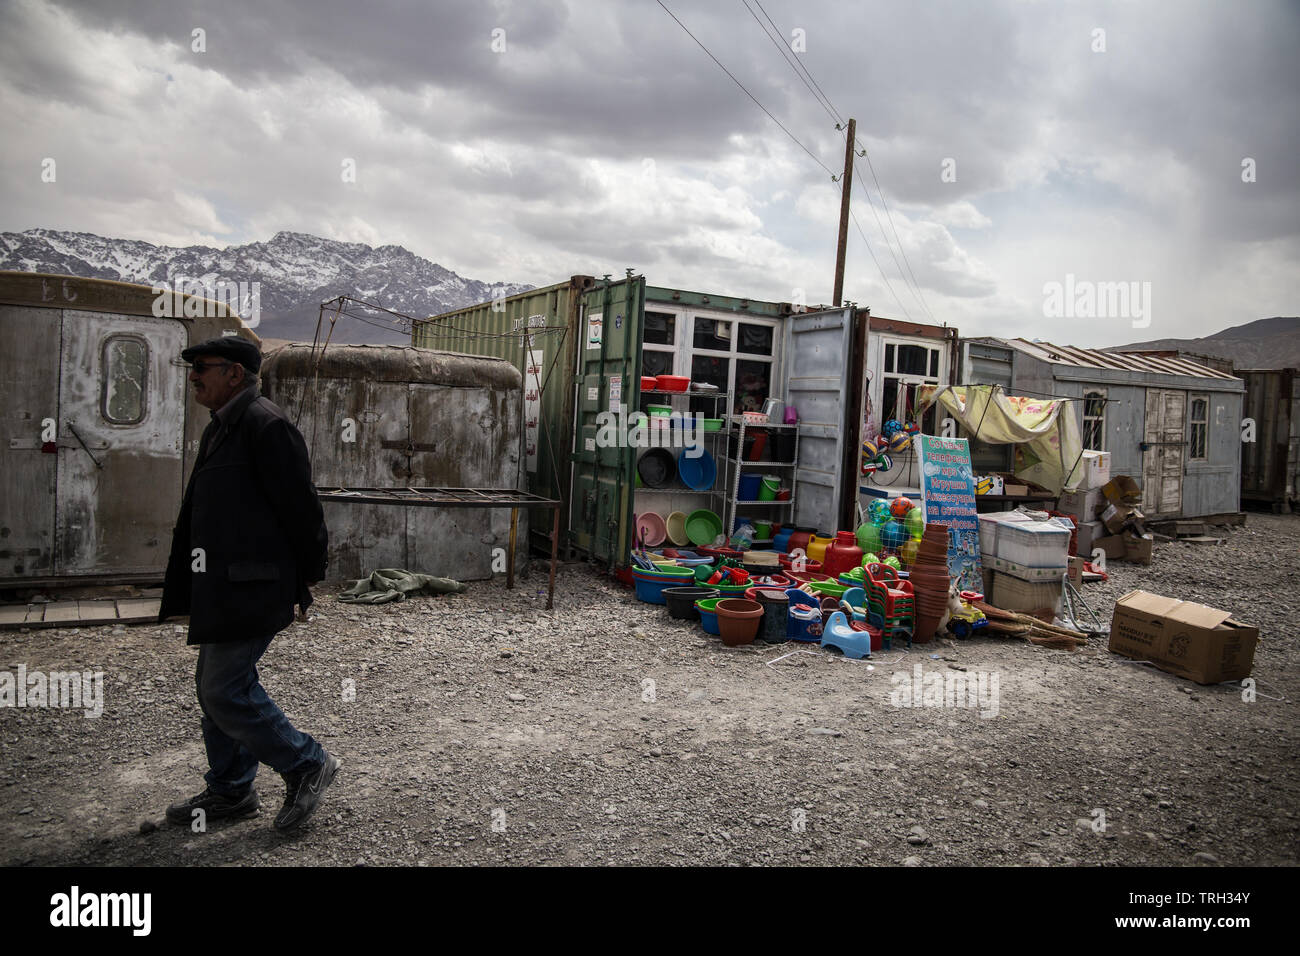 A local man passes by a stand selling plastic vessels in the Murghab container market, in Gorno-Badakhshan Autonomous Region, Tajikistan. Stock Photo